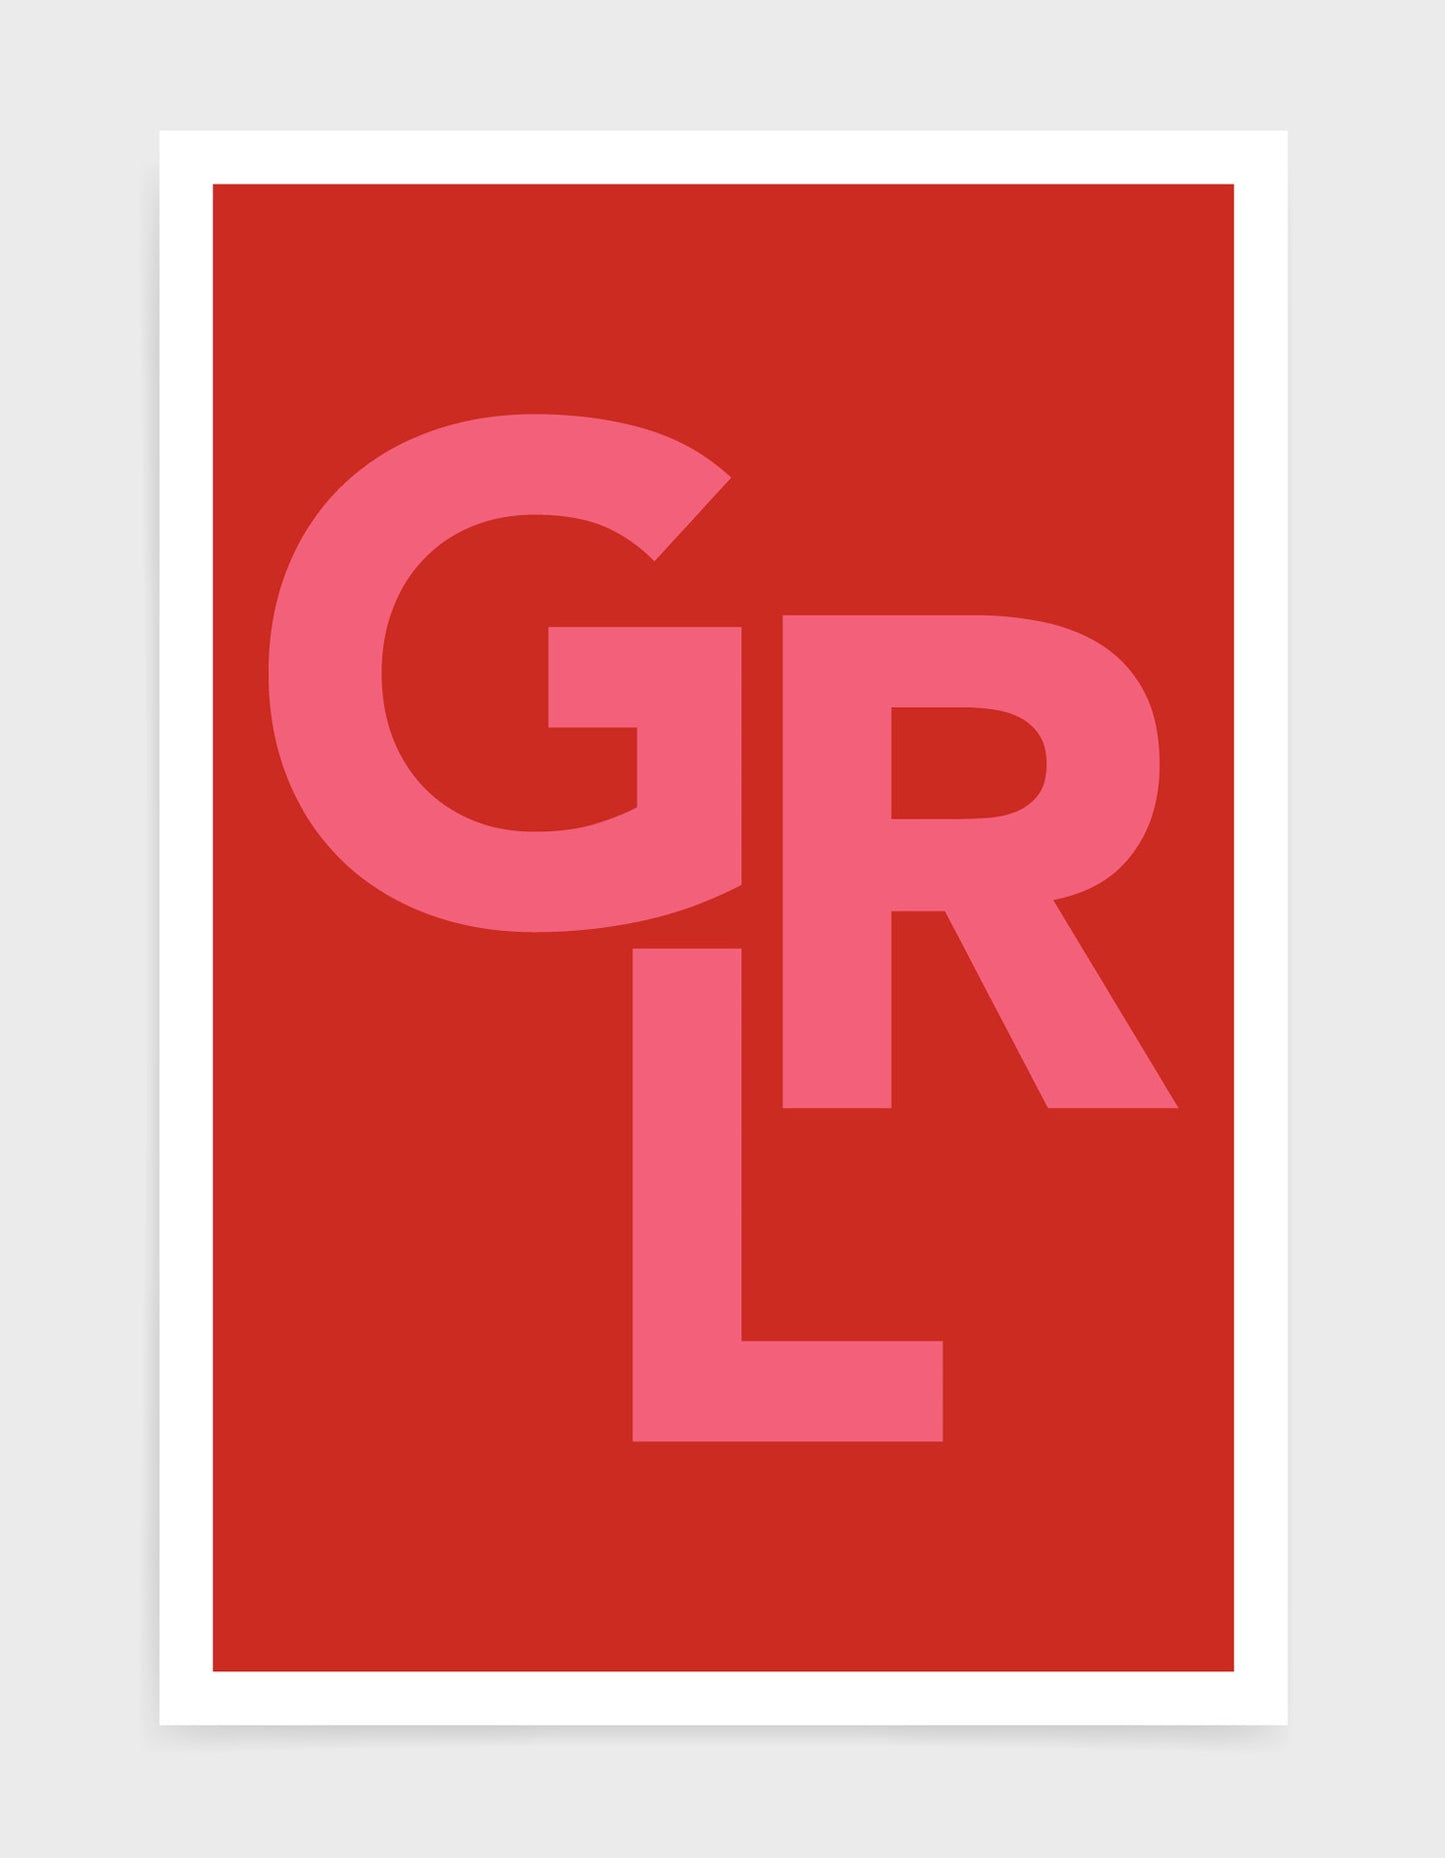 typography art print of the word GRL in pink text against a red background